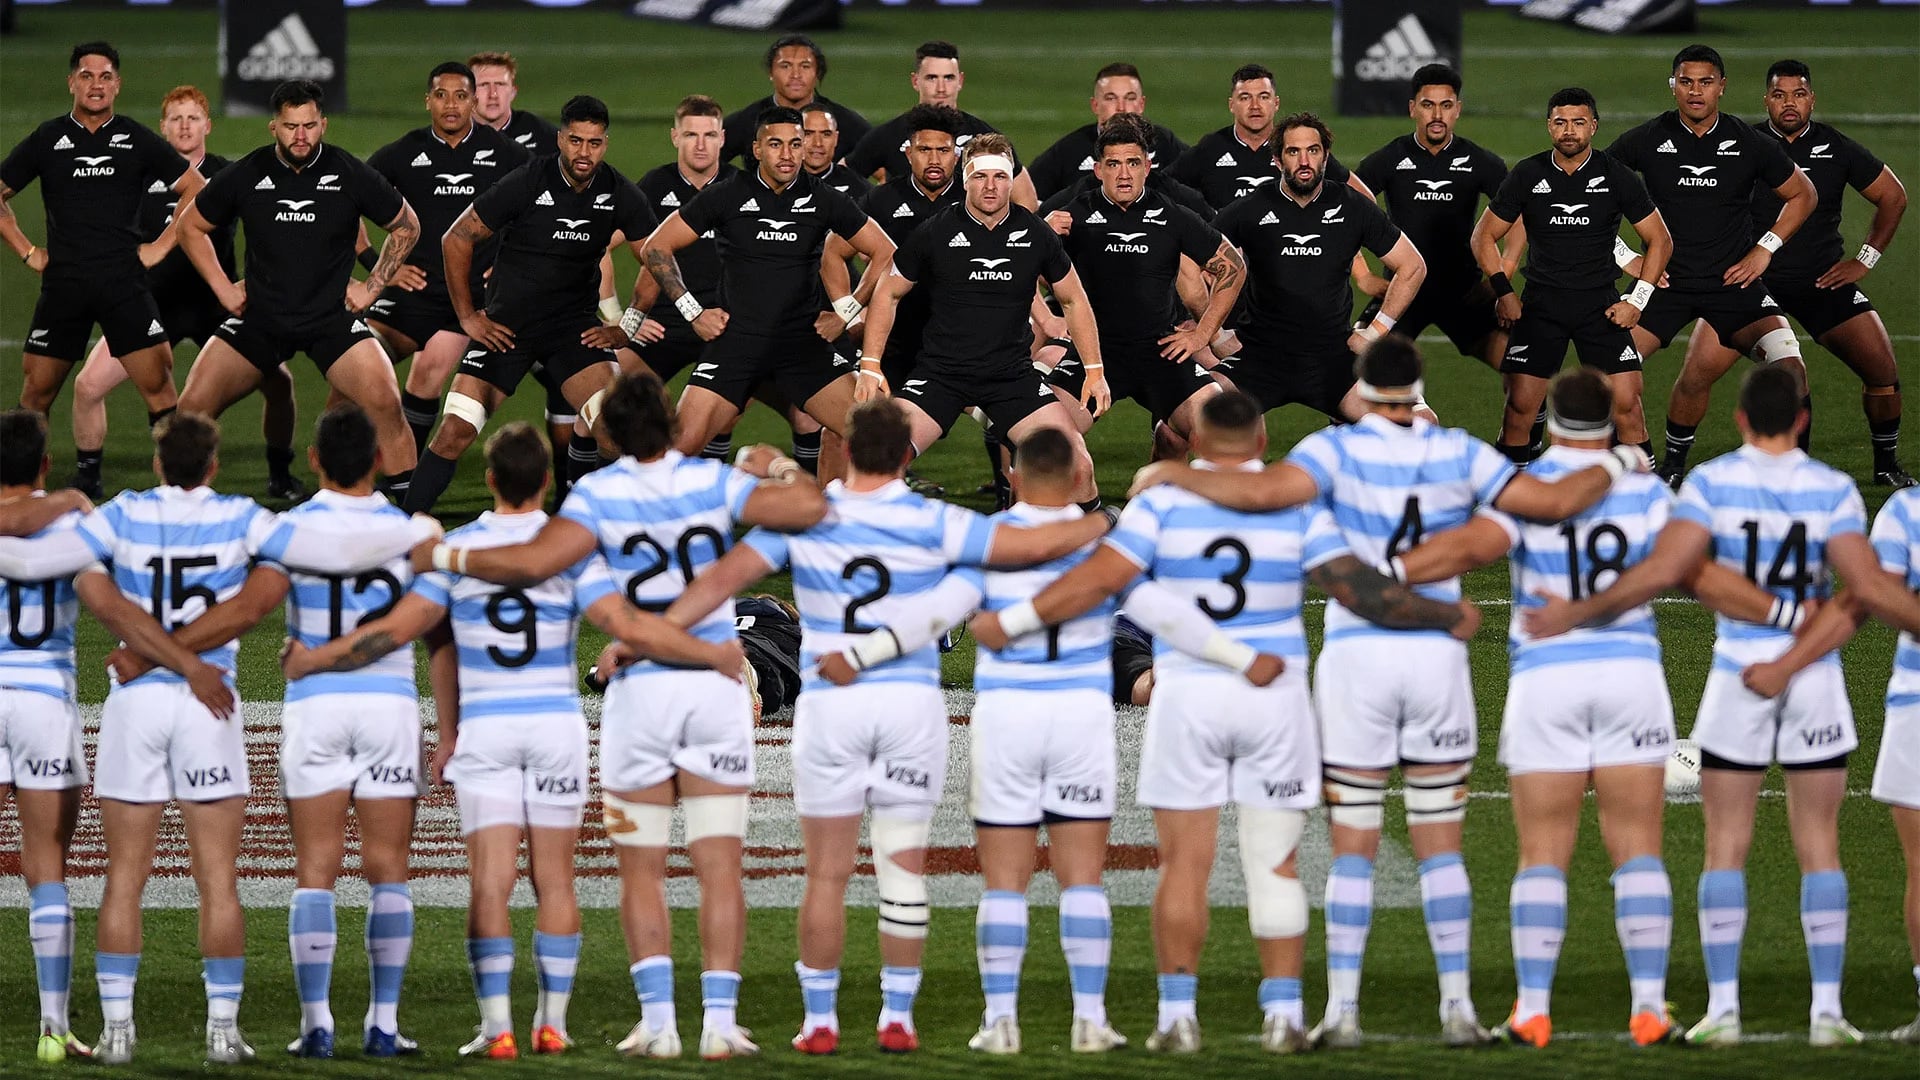 CHRISTCHURCH, NEW ZEALAND - AUGUST 27: New Zealand perform a haka during The Rugby Championship match between the New Zealand All Blacks and Argentina Pumas at Orangetheory Stadium on August 27, 2022 in Christchurch, New Zealand. (Photo by Joe Allison/Getty Images)